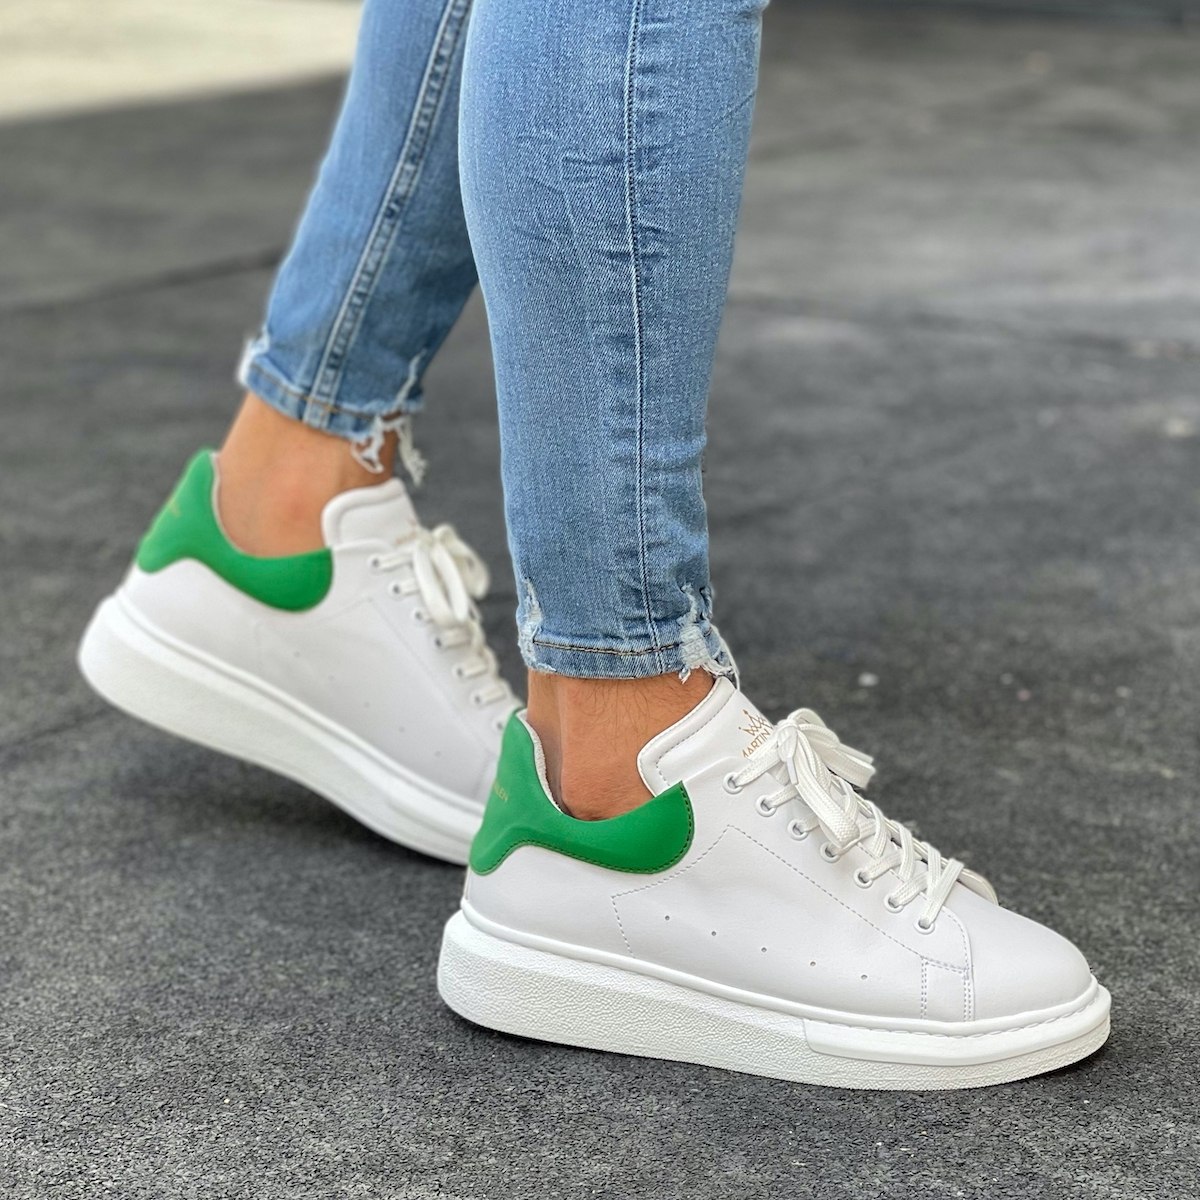 Hype Sole Sneakers in White-Partial Green | Martin Valen